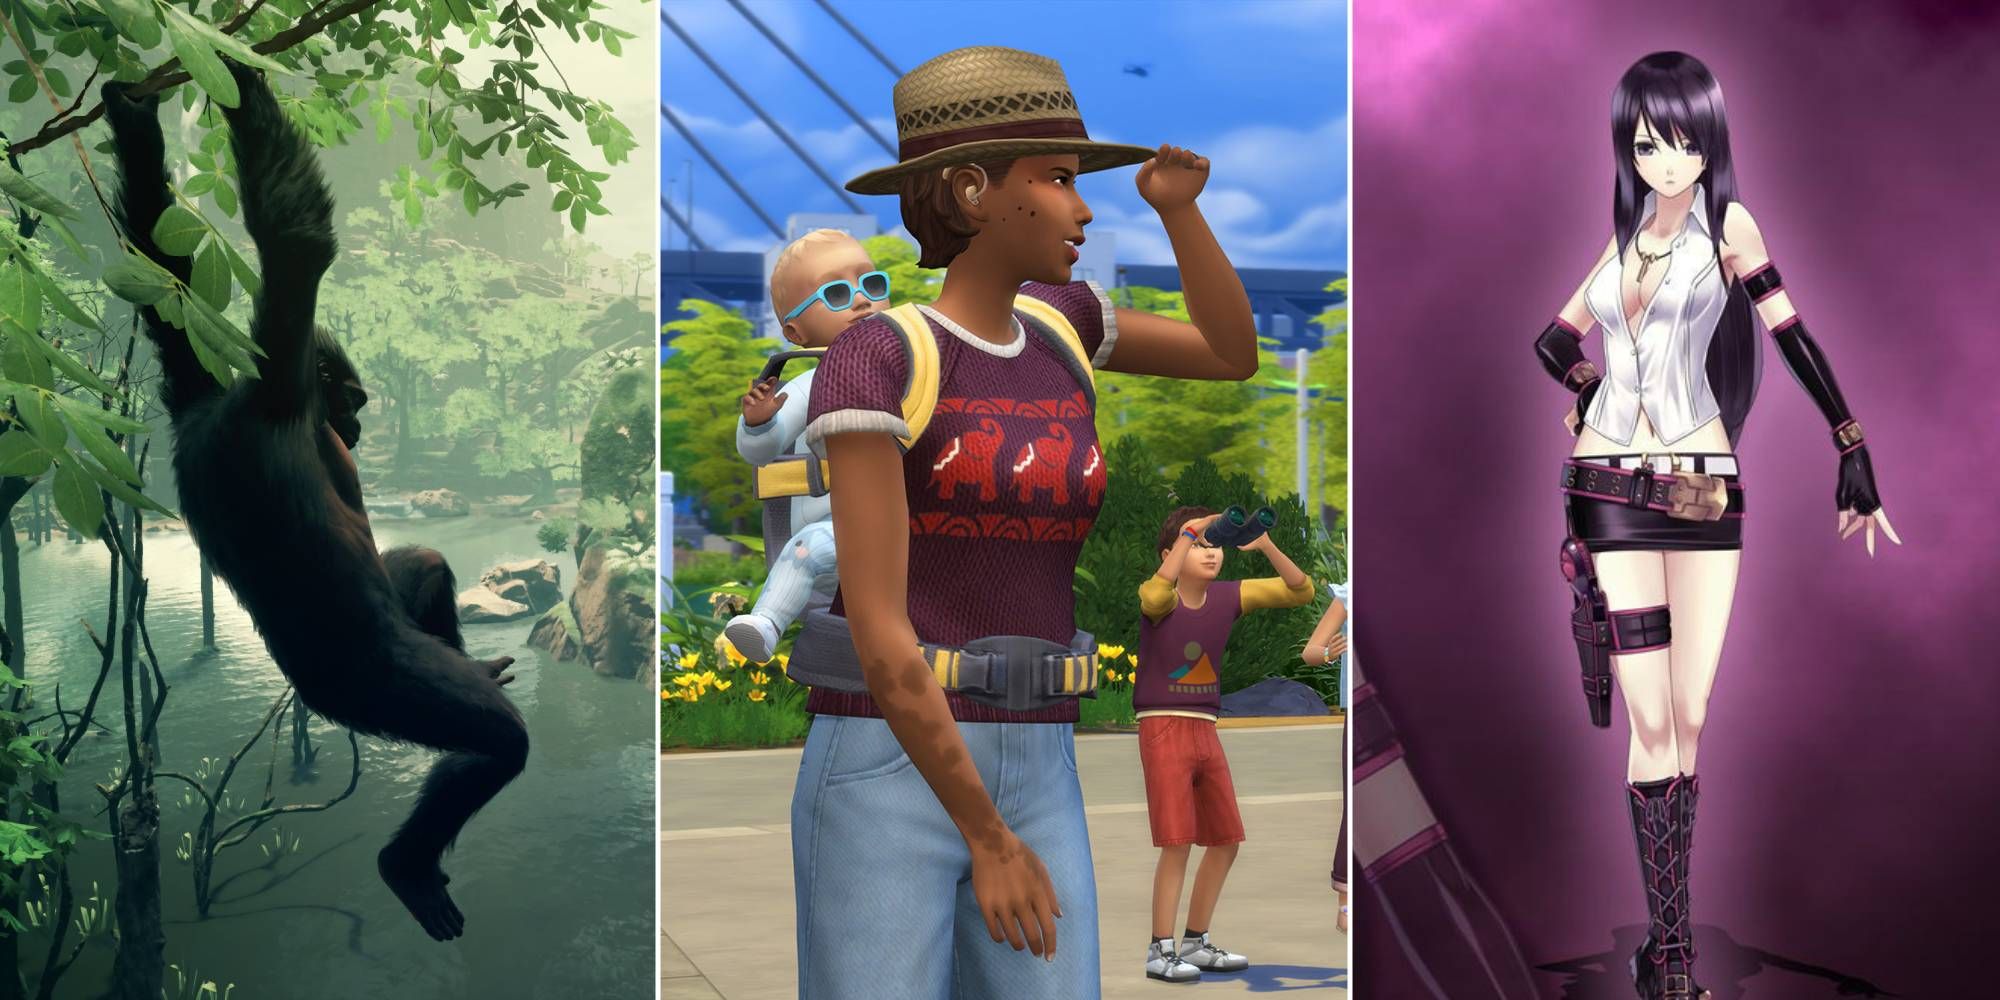 A primate swings from a branch in Ancestors, a woman holds up her hand to shade the sun with a baby strapped to her back in The Sims 4, and a woman from Agarest poses with a pistol on her thigh.